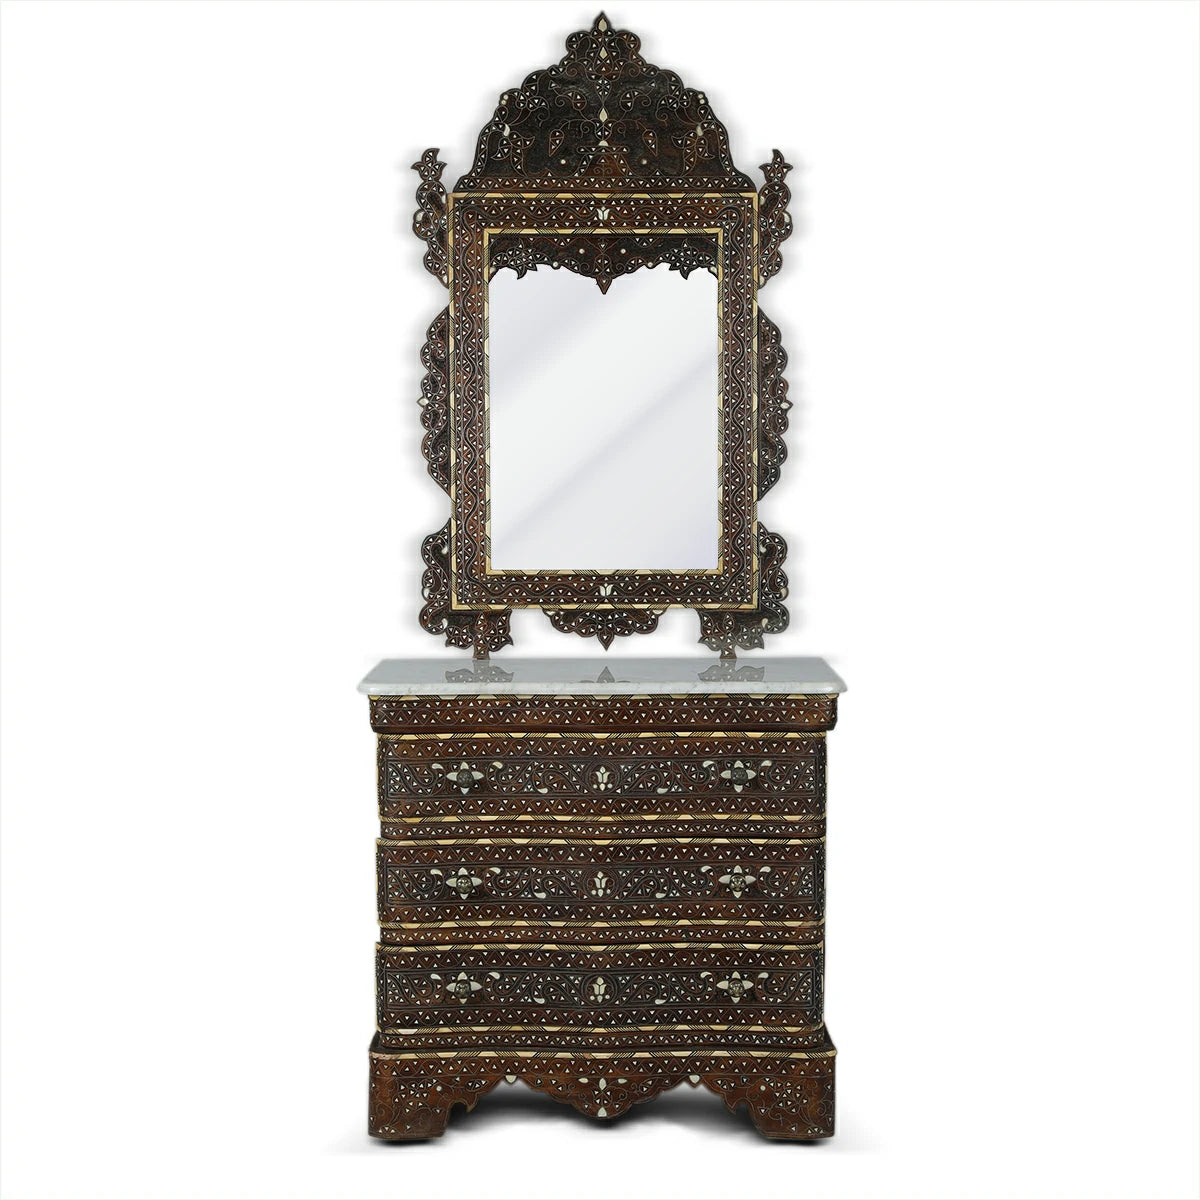 Handmade Mother of Pearl, Camel bone Inlaid Carved Walnut Wood Mirror & Chest of Drawers with White Marble Top